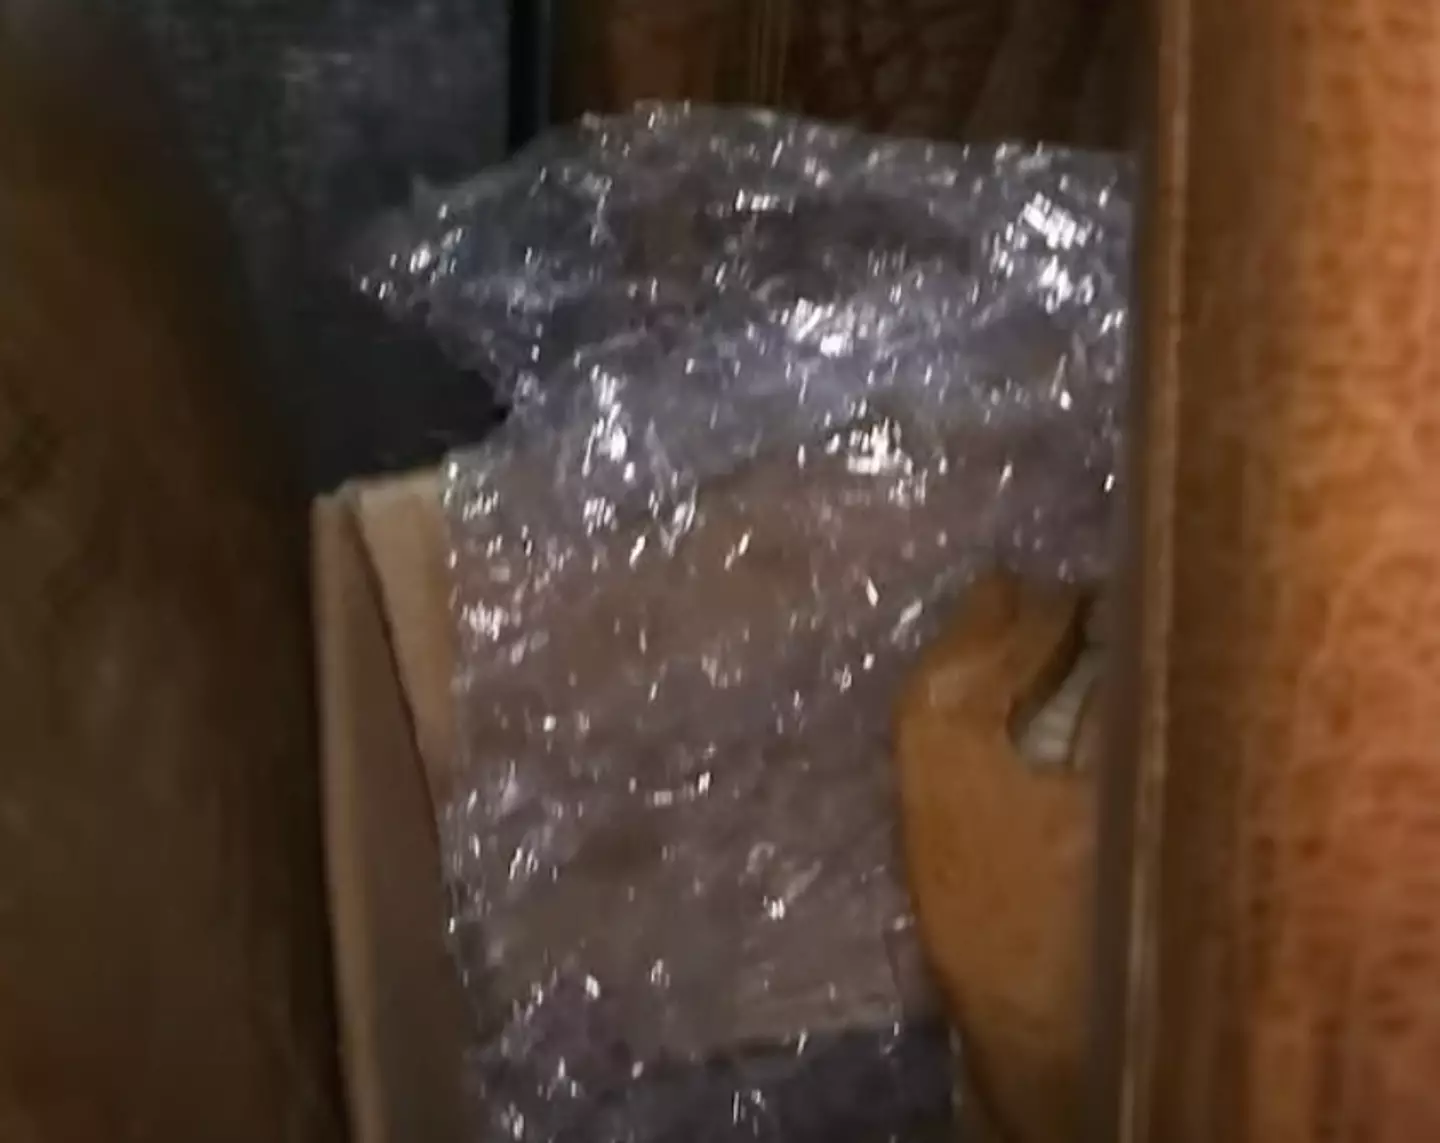 Barry Weiss caught sight of the object poking out the side of a wooden box.